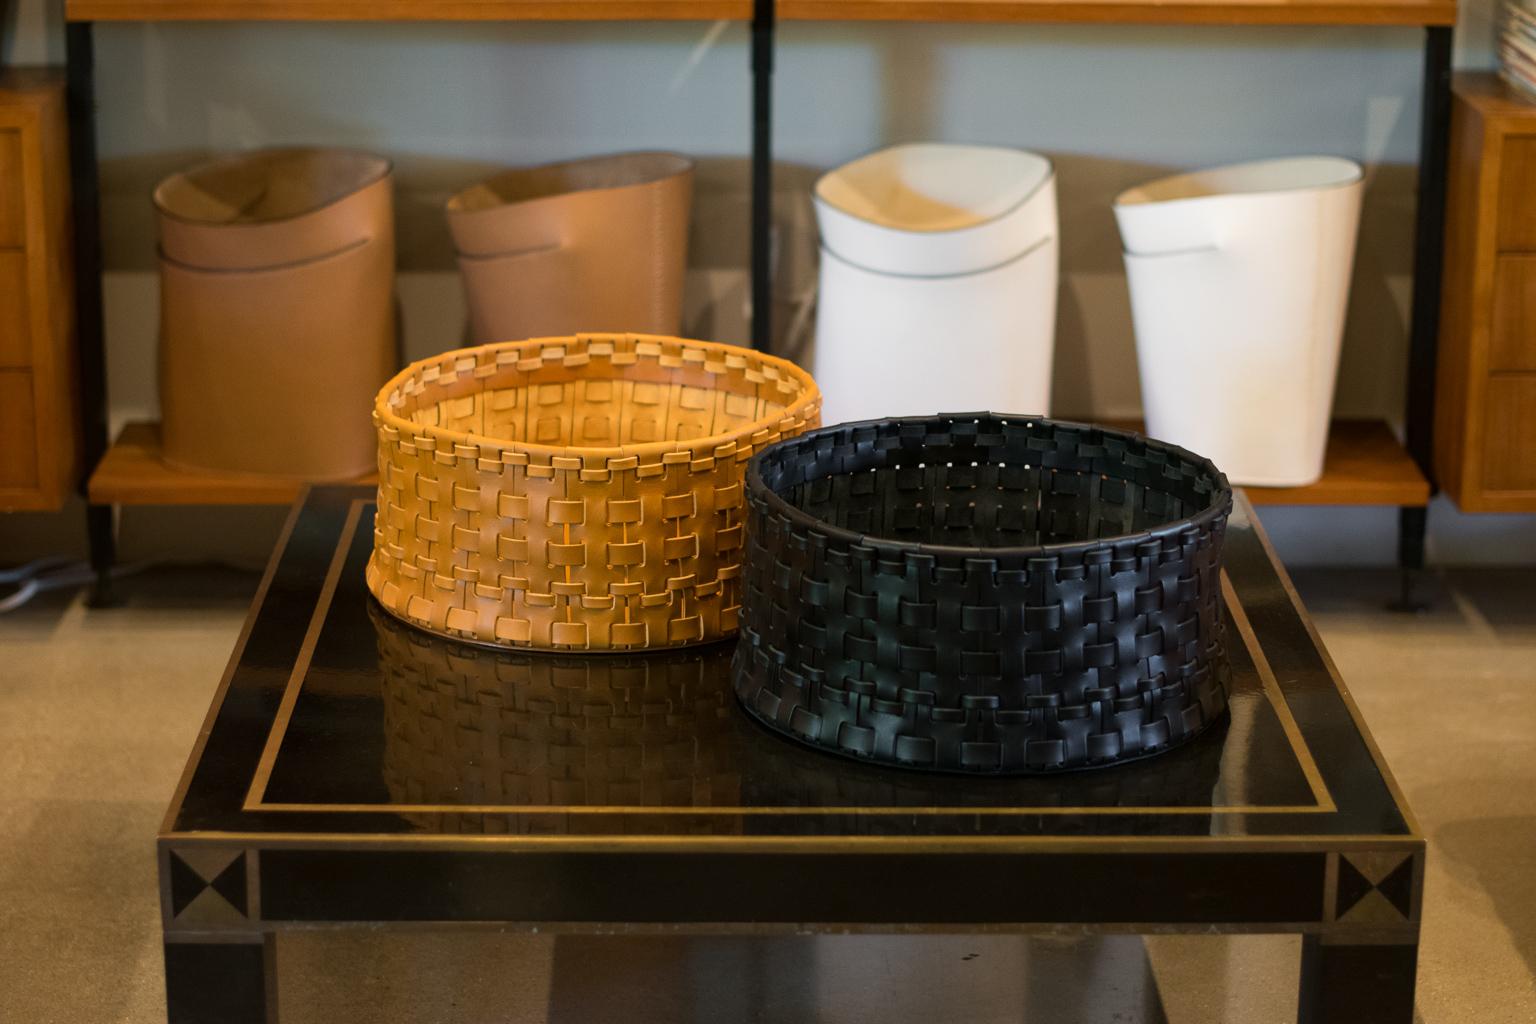 Handmade woven leather basket by Oscar Maschera. One available in each color, Elm and black, sold separately. 

Artist turned artisan, Oscar Maschera exclusively uses genuine Italian leather, treated with natural extracts and dyed in aniline